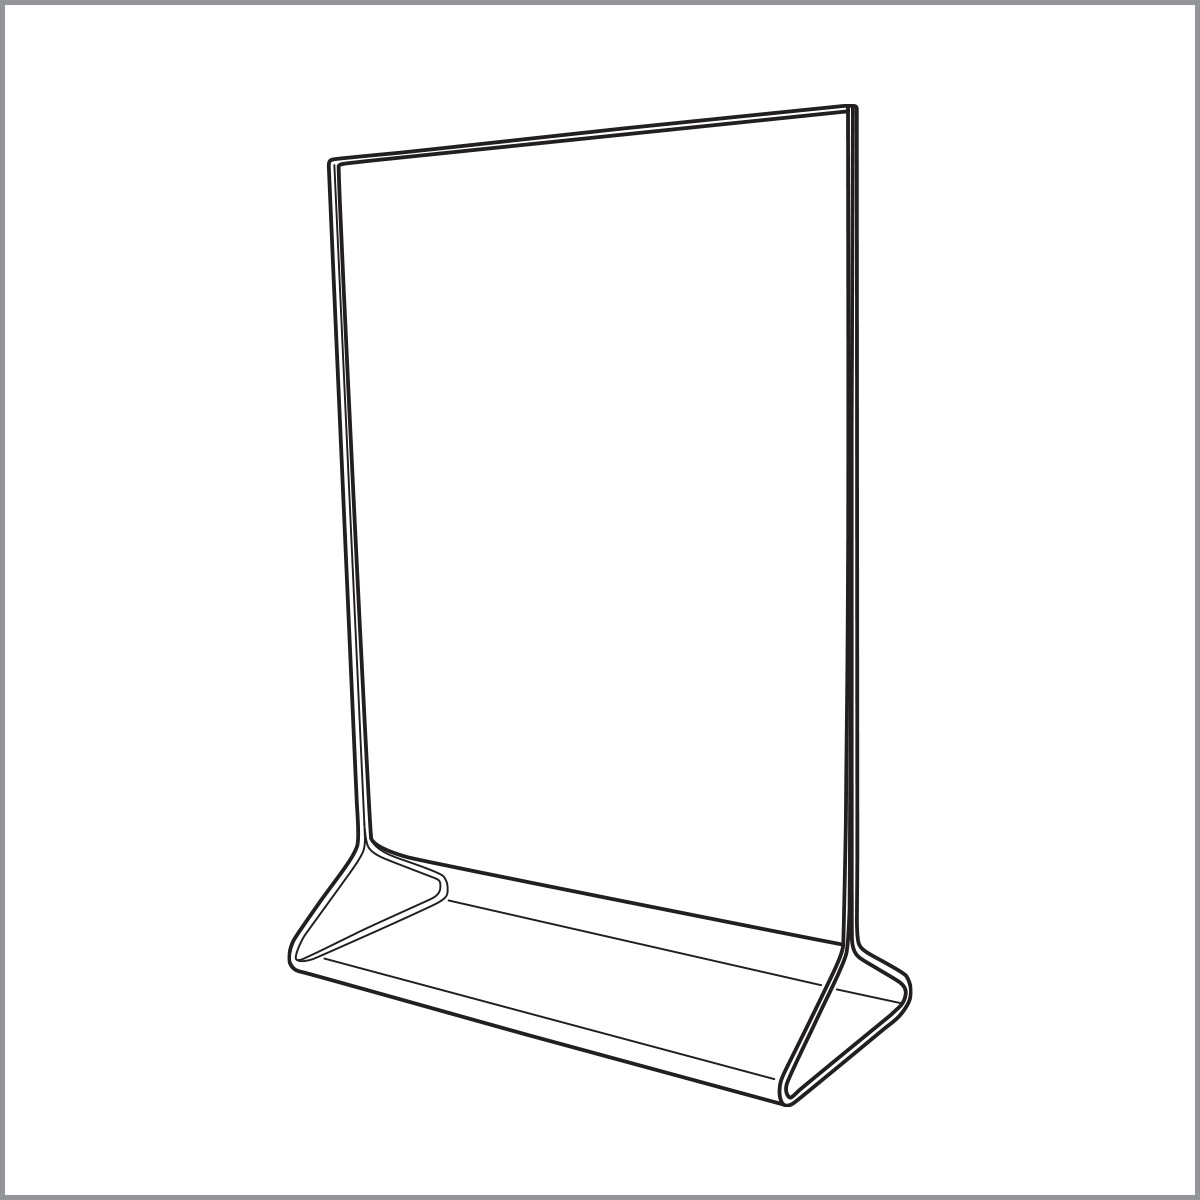 5 x 7 Acrylic Tabletop Sign Holders